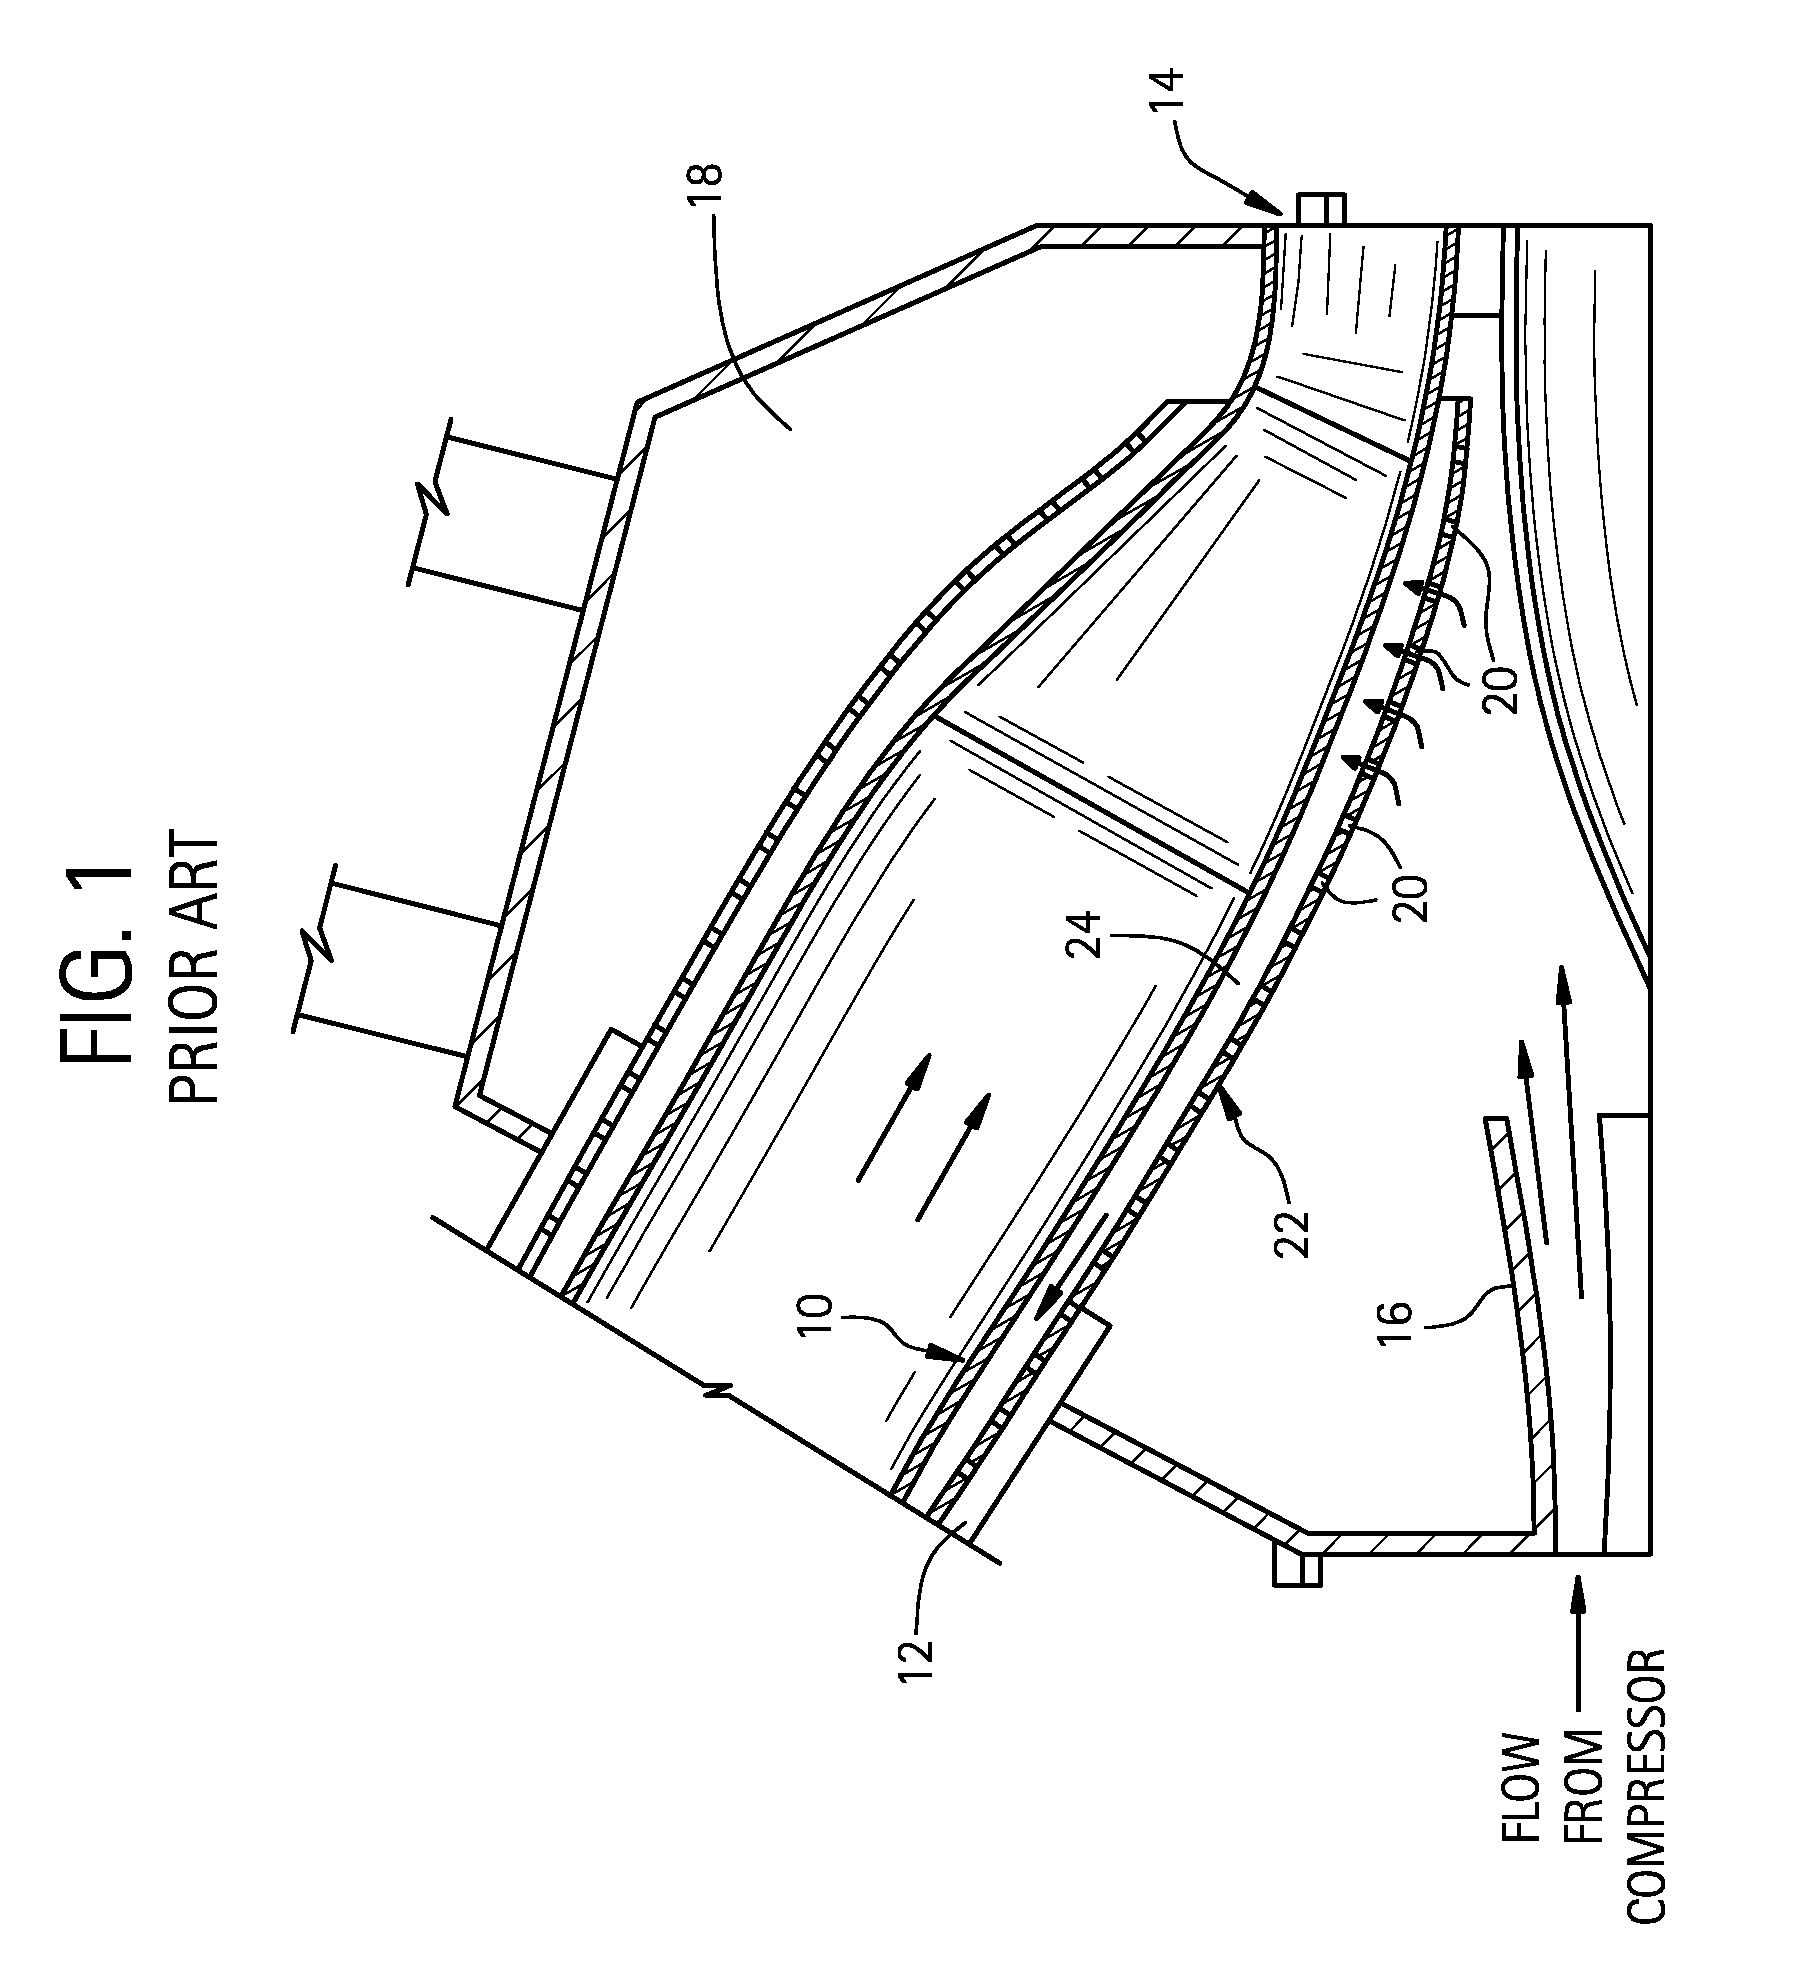 Method and apparatus for cooling combustor liner and transition piece of a gas turbine